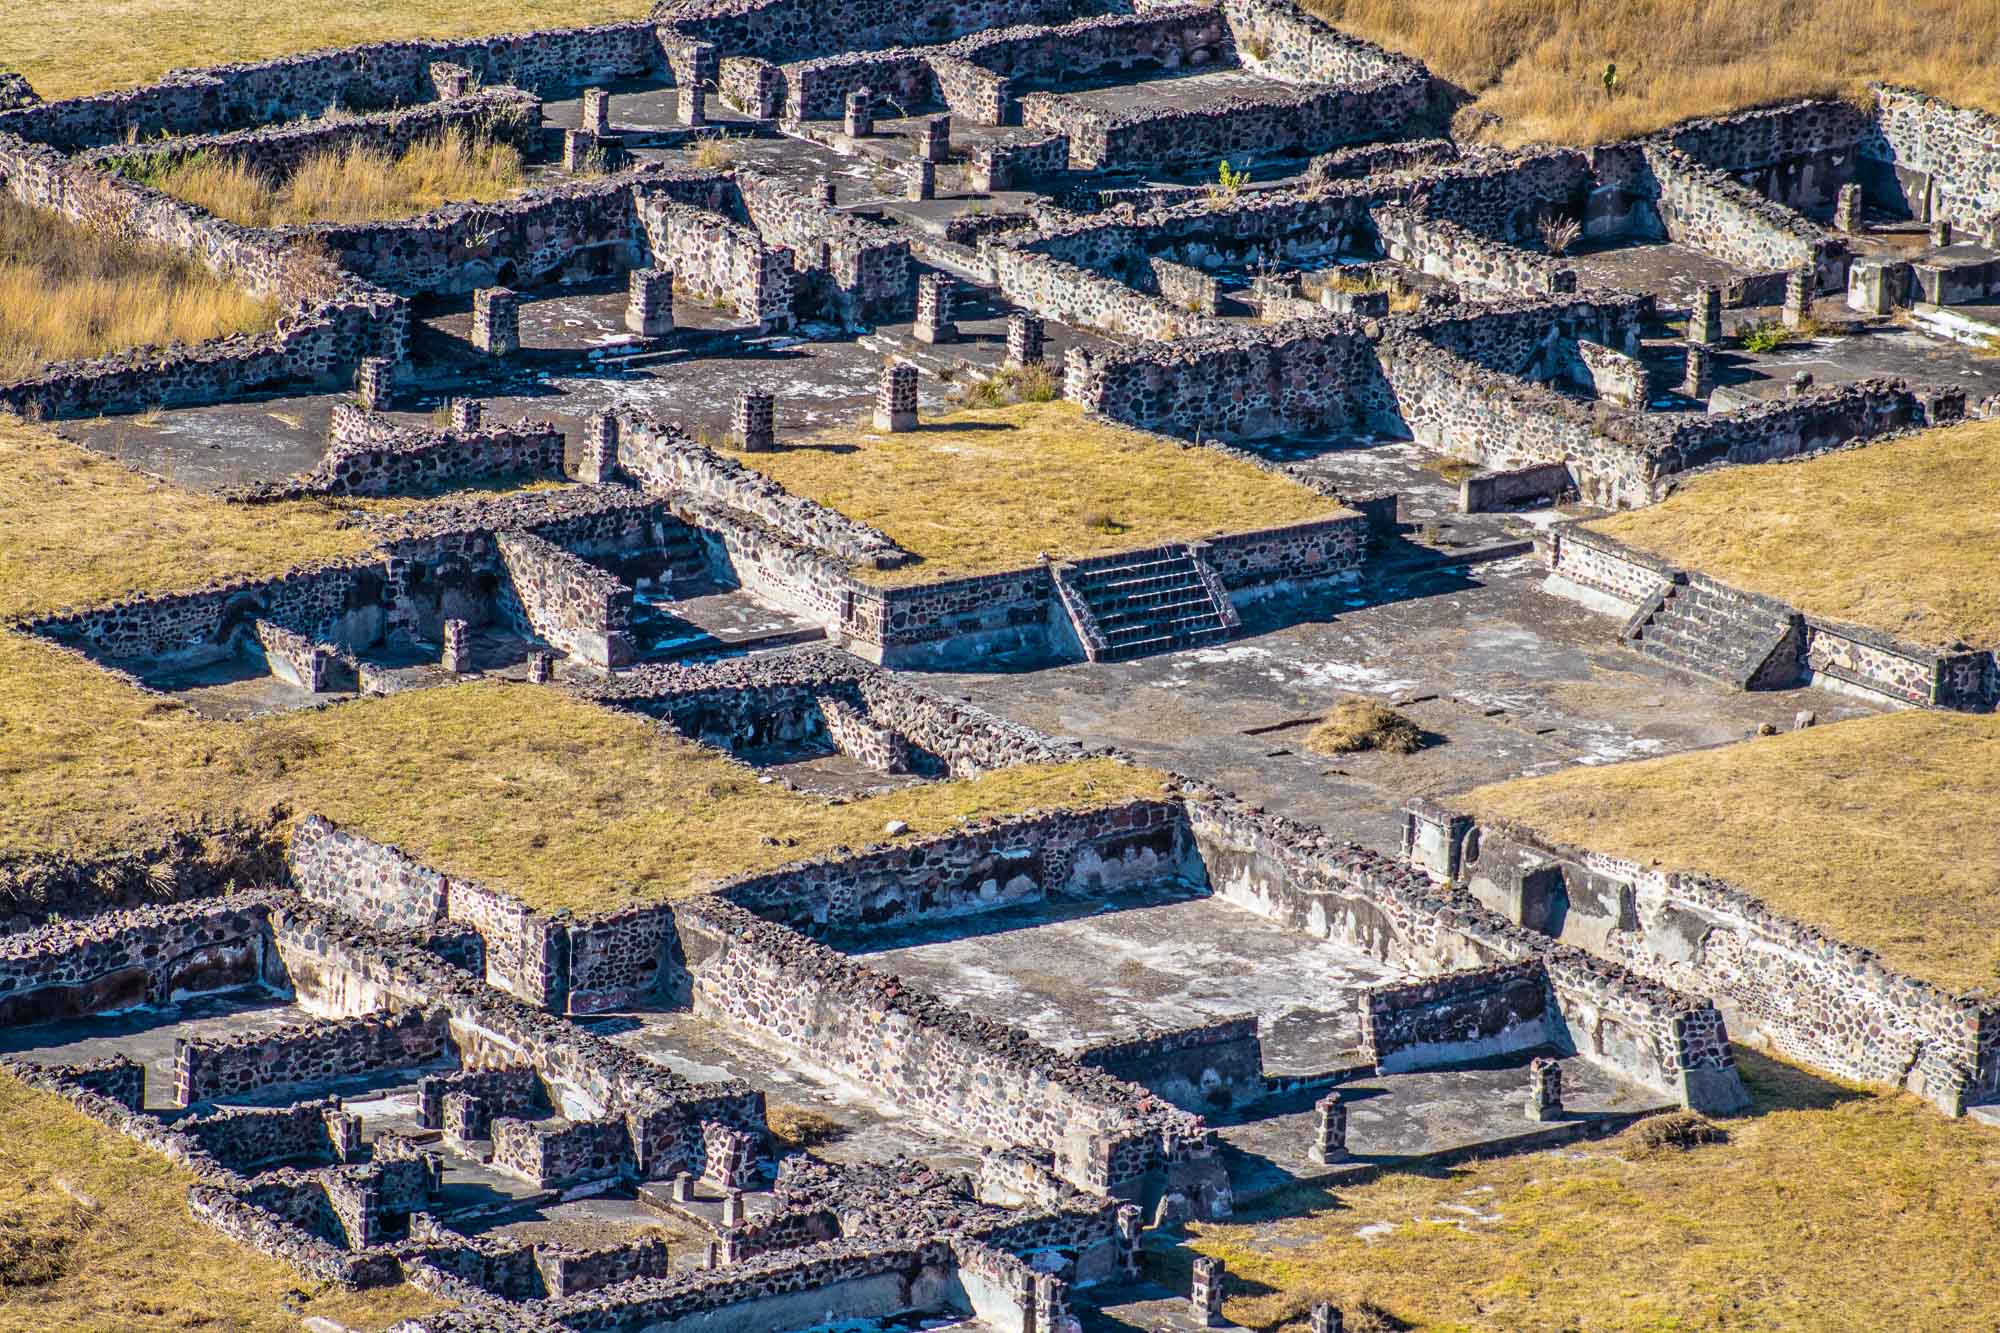 Ruins in the UNESCO world heritage site Teotihuacan in Mexico